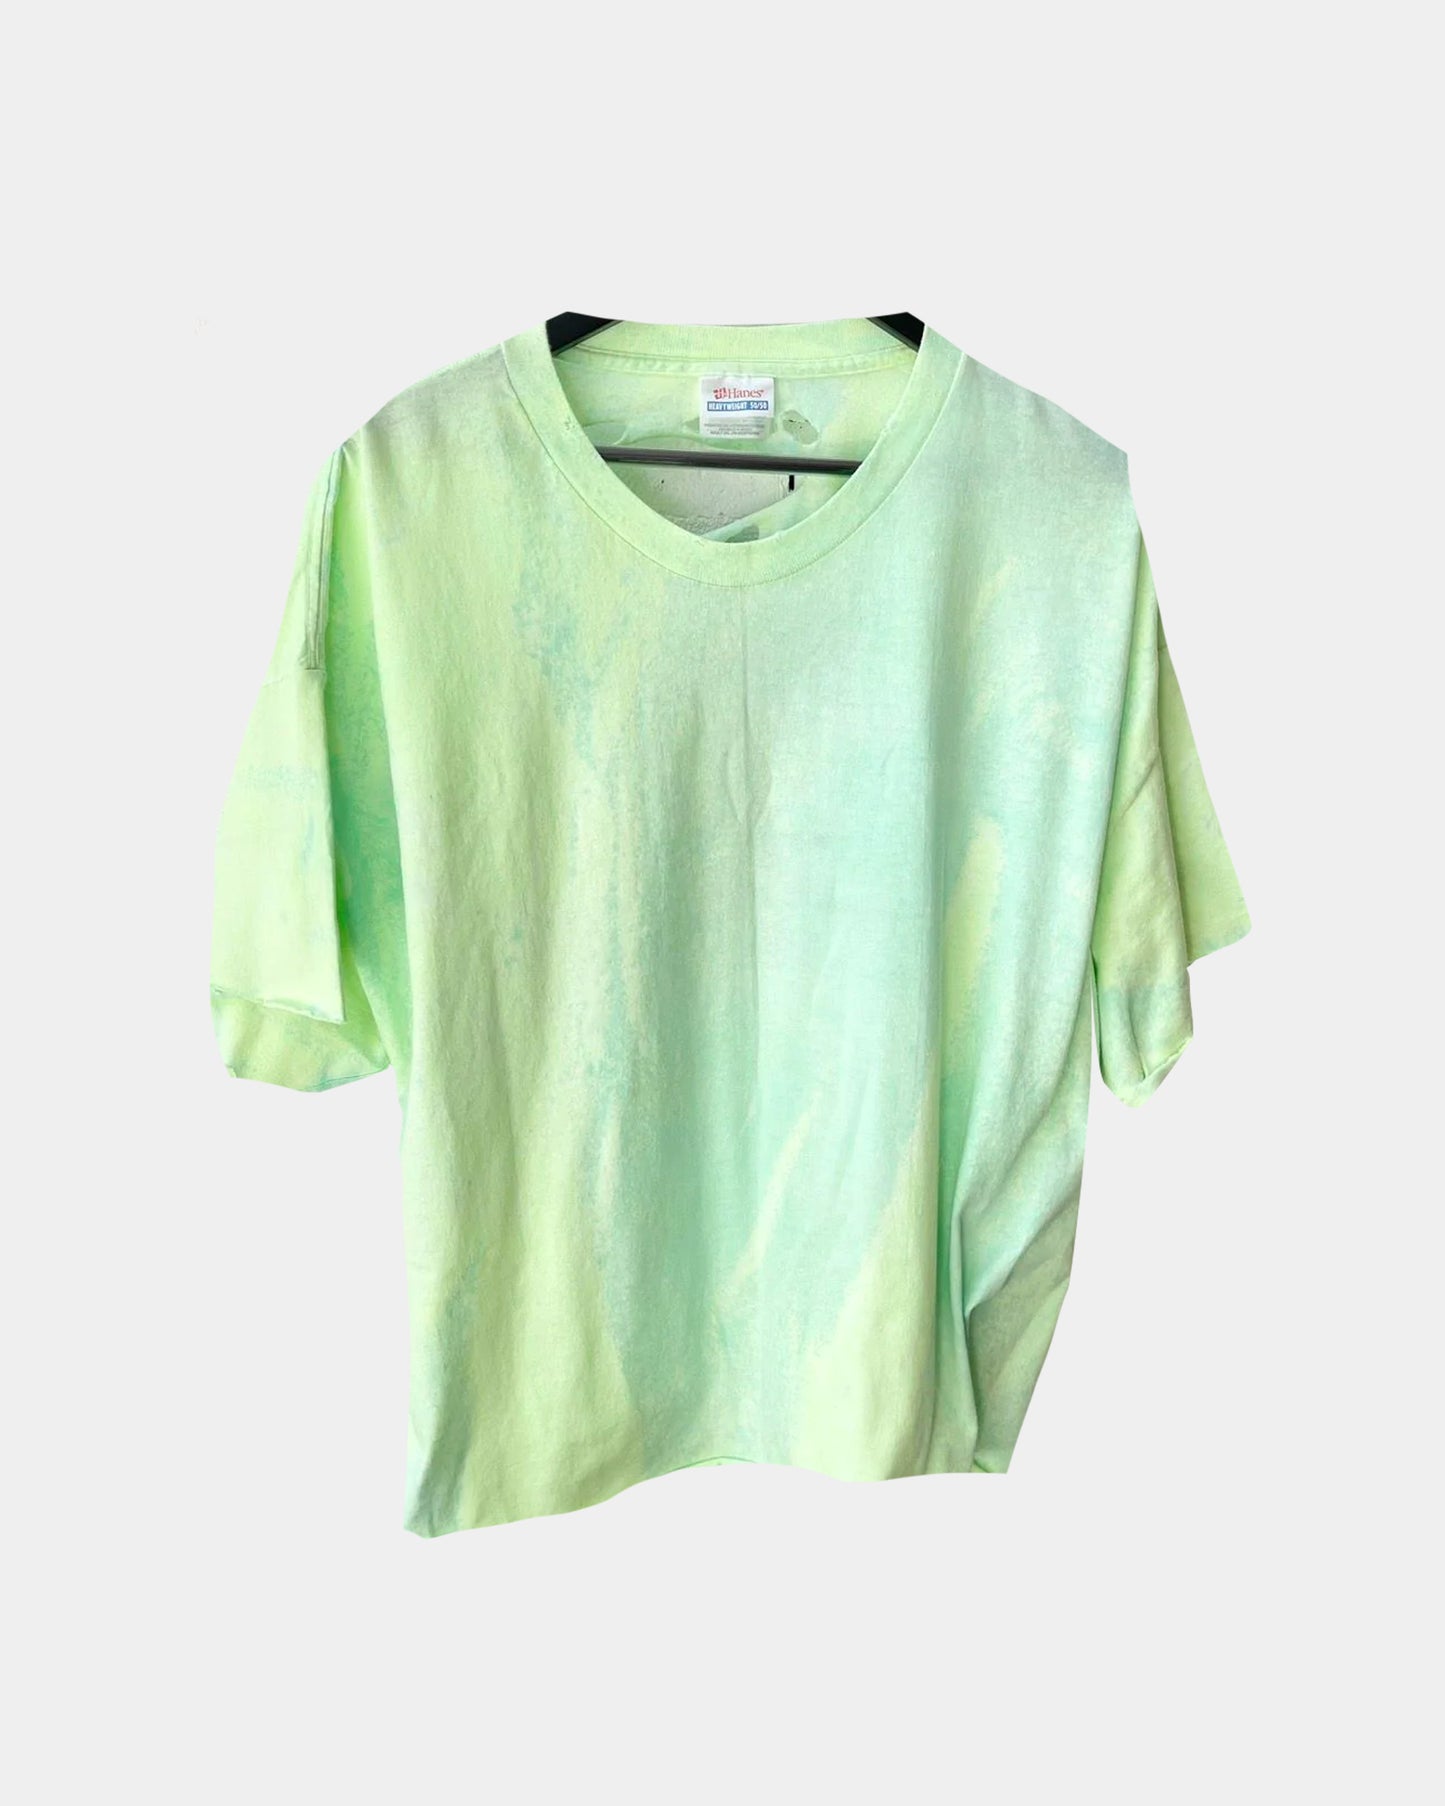 Vintage THRASHED Neon Lime Green JAPANESE TEXT FONT Shirt